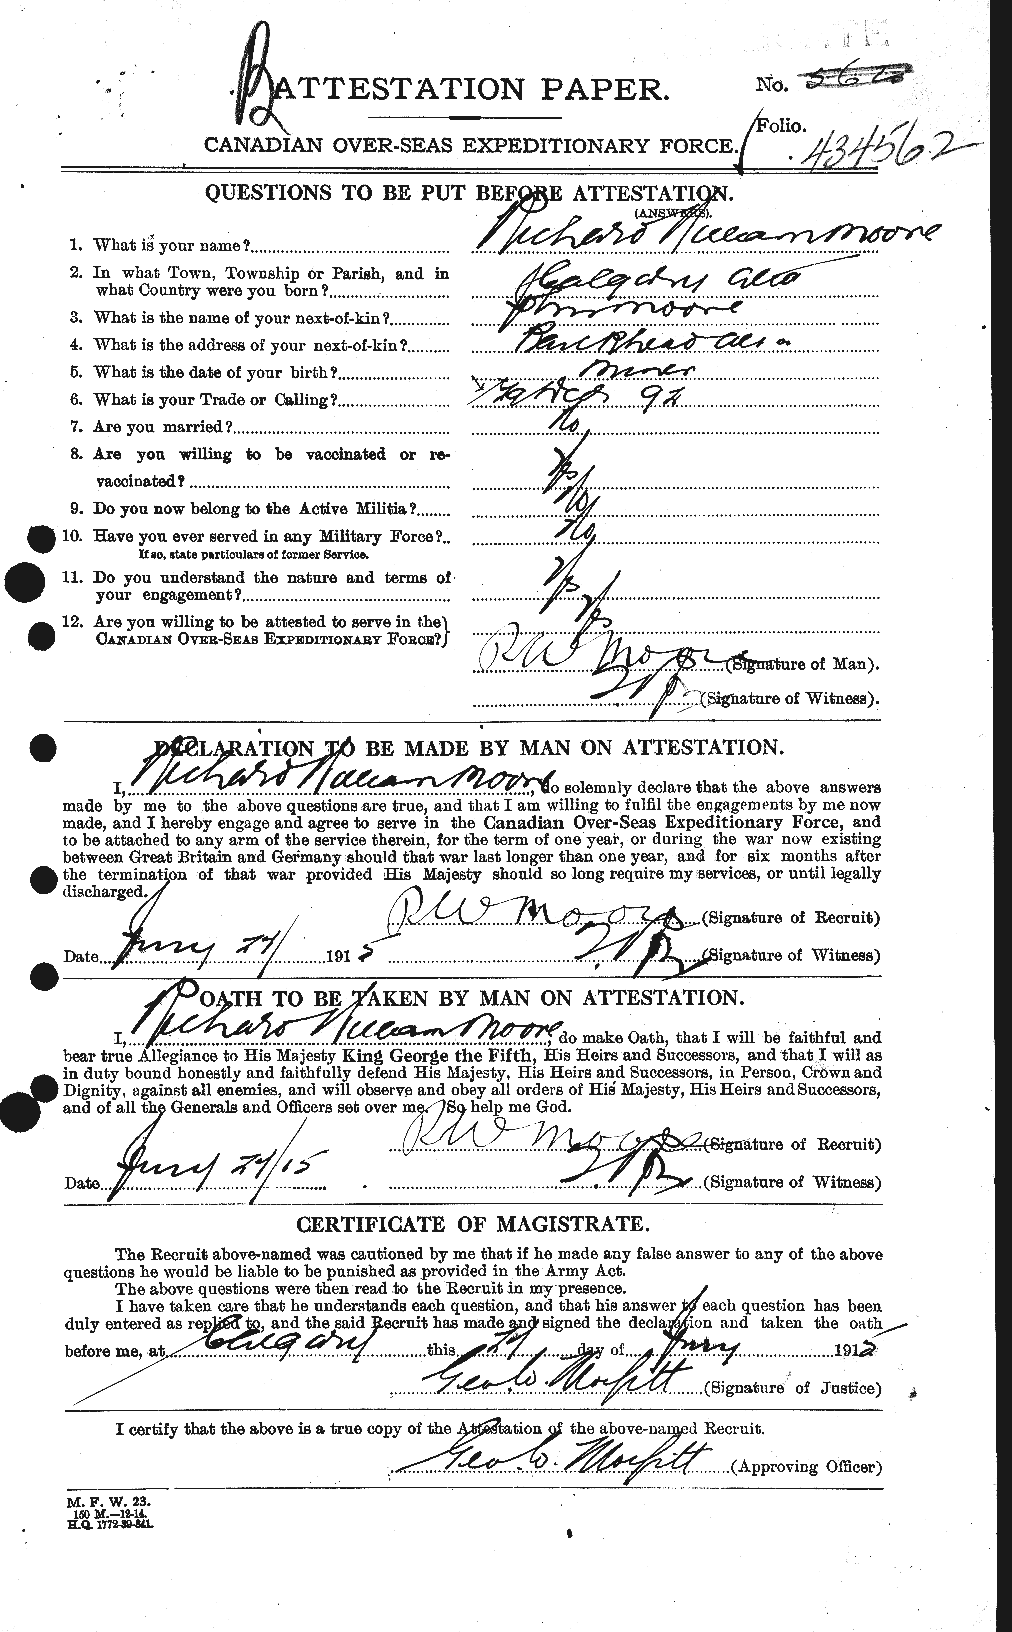 Personnel Records of the First World War - CEF 503542a